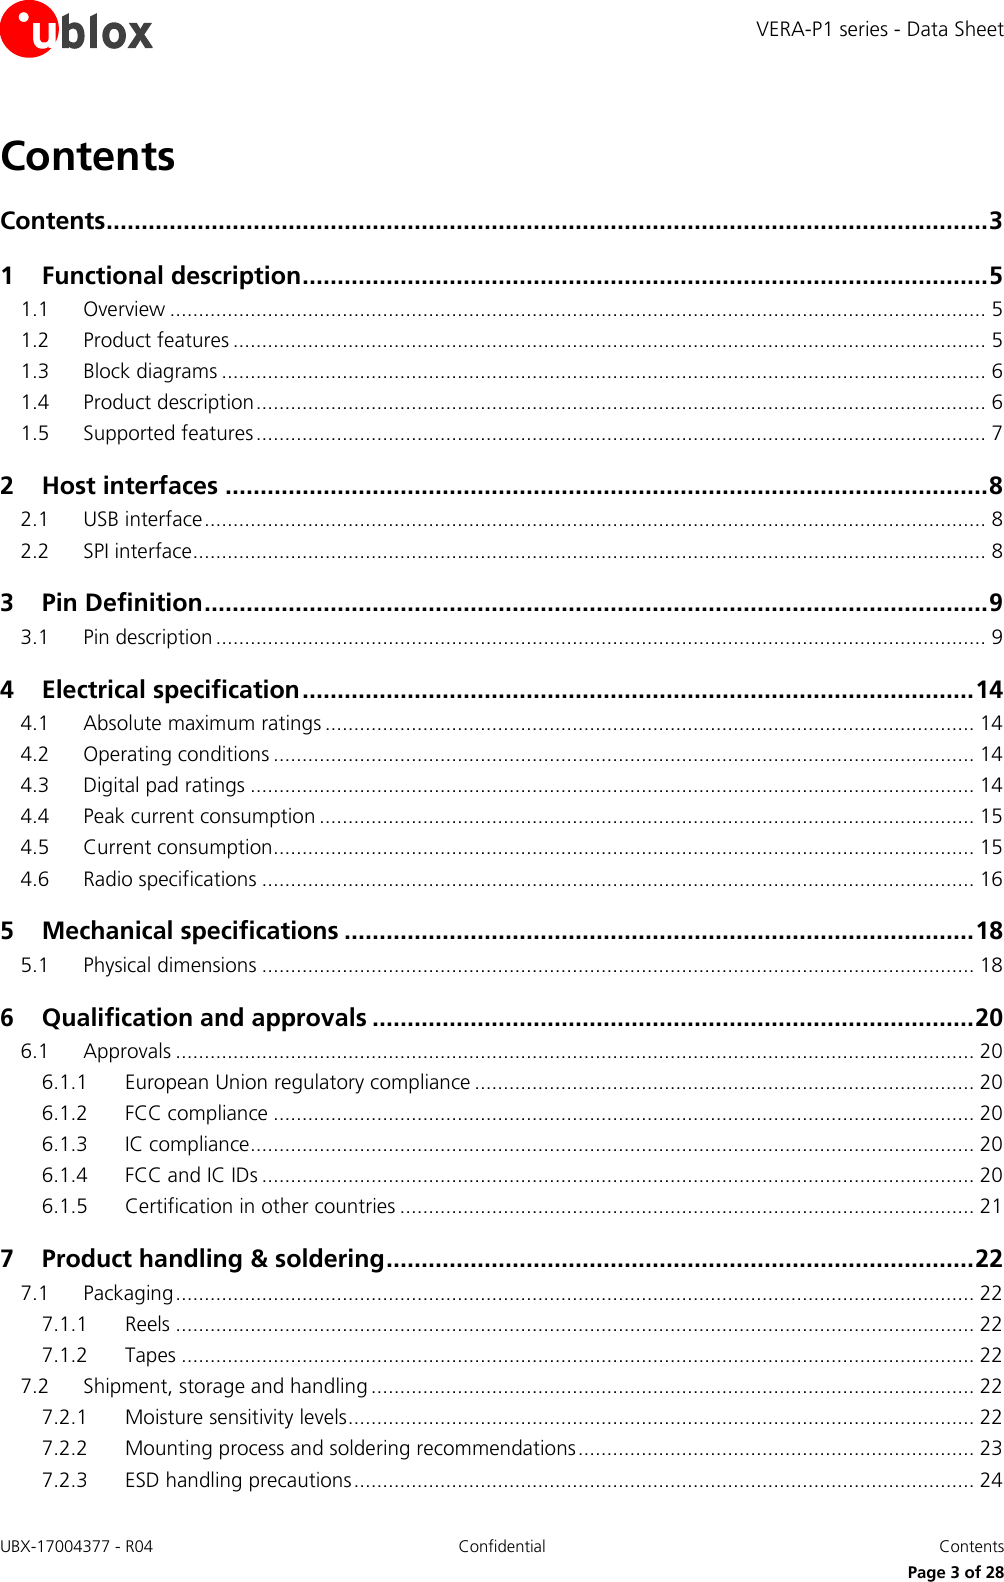 VERA-P1 series - Data Sheet UBX-17004377 - R04 Confidential  Contents     Page 3 of 28 Contents Contents .............................................................................................................................. 3 1 Functional description .................................................................................................. 5 1.1 Overview .............................................................................................................................................. 5 1.2 Product features ................................................................................................................................... 5 1.3 Block diagrams ..................................................................................................................................... 6 1.4 Product description ............................................................................................................................... 6 1.5 Supported features ............................................................................................................................... 7 2 Host interfaces ............................................................................................................. 8 2.1 USB interface ........................................................................................................................................ 8 2.2 SPI interface .......................................................................................................................................... 8 3 Pin Definition ................................................................................................................ 9 3.1 Pin description ...................................................................................................................................... 9 4 Electrical specification ................................................................................................ 14 4.1 Absolute maximum ratings ................................................................................................................. 14 4.2 Operating conditions .......................................................................................................................... 14 4.3 Digital pad ratings .............................................................................................................................. 14 4.4 Peak current consumption .................................................................................................................. 15 4.5 Current consumption.......................................................................................................................... 15 4.6 Radio specifications ............................................................................................................................ 16 5 Mechanical specifications .......................................................................................... 18 5.1 Physical dimensions ............................................................................................................................ 18 6 Qualification and approvals ...................................................................................... 20 6.1 Approvals ........................................................................................................................................... 20 6.1.1 European Union regulatory compliance ....................................................................................... 20 6.1.2 FCC compliance .......................................................................................................................... 20 6.1.3 IC compliance.............................................................................................................................. 20 6.1.4 FCC and IC IDs ............................................................................................................................ 20 6.1.5 Certification in other countries .................................................................................................... 21 7 Product handling &amp; soldering .................................................................................... 22 7.1 Packaging ........................................................................................................................................... 22 7.1.1 Reels ........................................................................................................................................... 22 7.1.2 Tapes .......................................................................................................................................... 22 7.2 Shipment, storage and handling ......................................................................................................... 22 7.2.1 Moisture sensitivity levels ............................................................................................................. 22 7.2.2 Mounting process and soldering recommendations ..................................................................... 23 7.2.3 ESD handling precautions ............................................................................................................ 24 